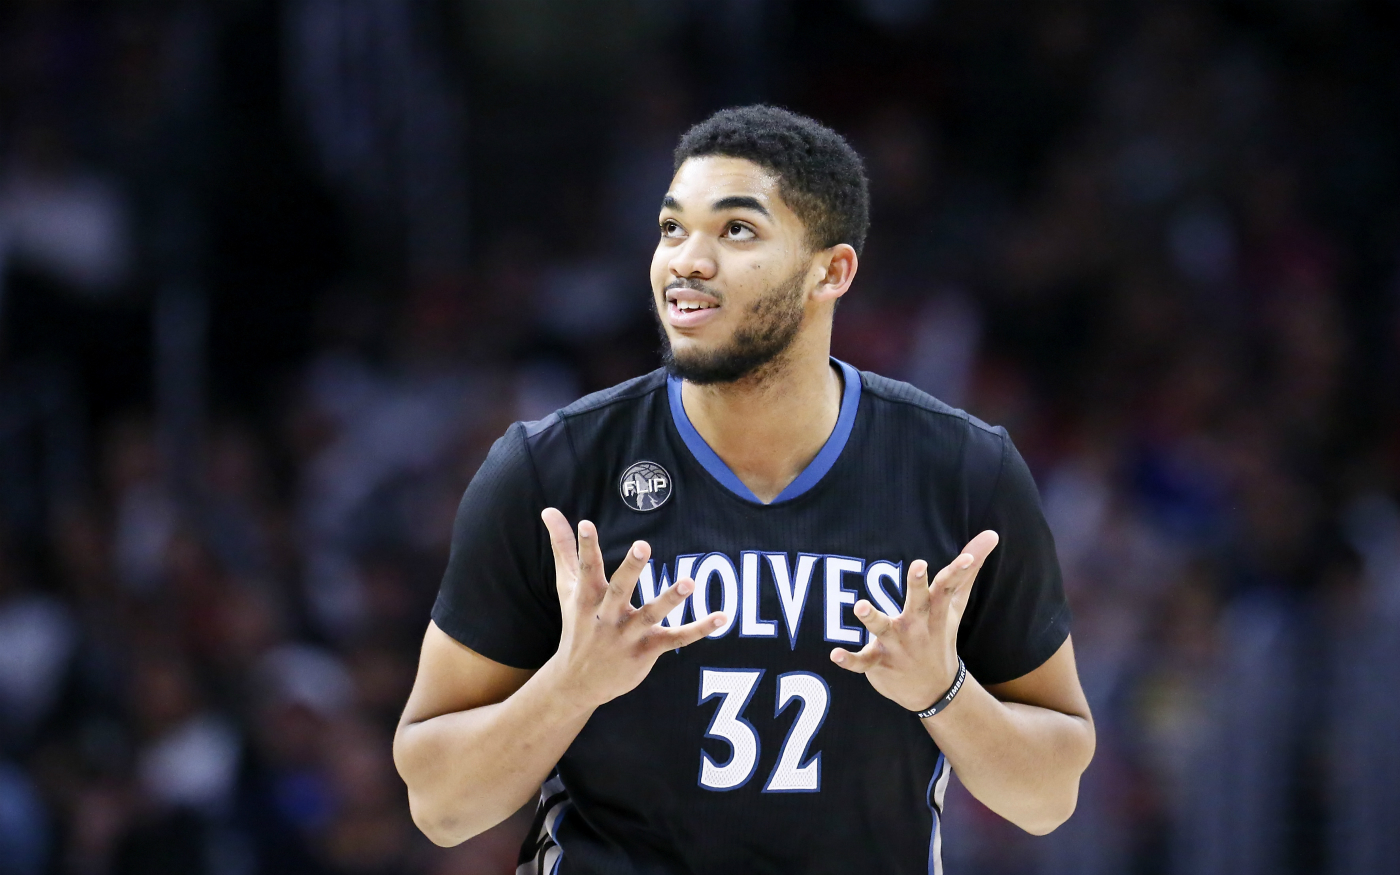 Karl-Anthony Towns nommé Rookie Of the Year ce lundi ?